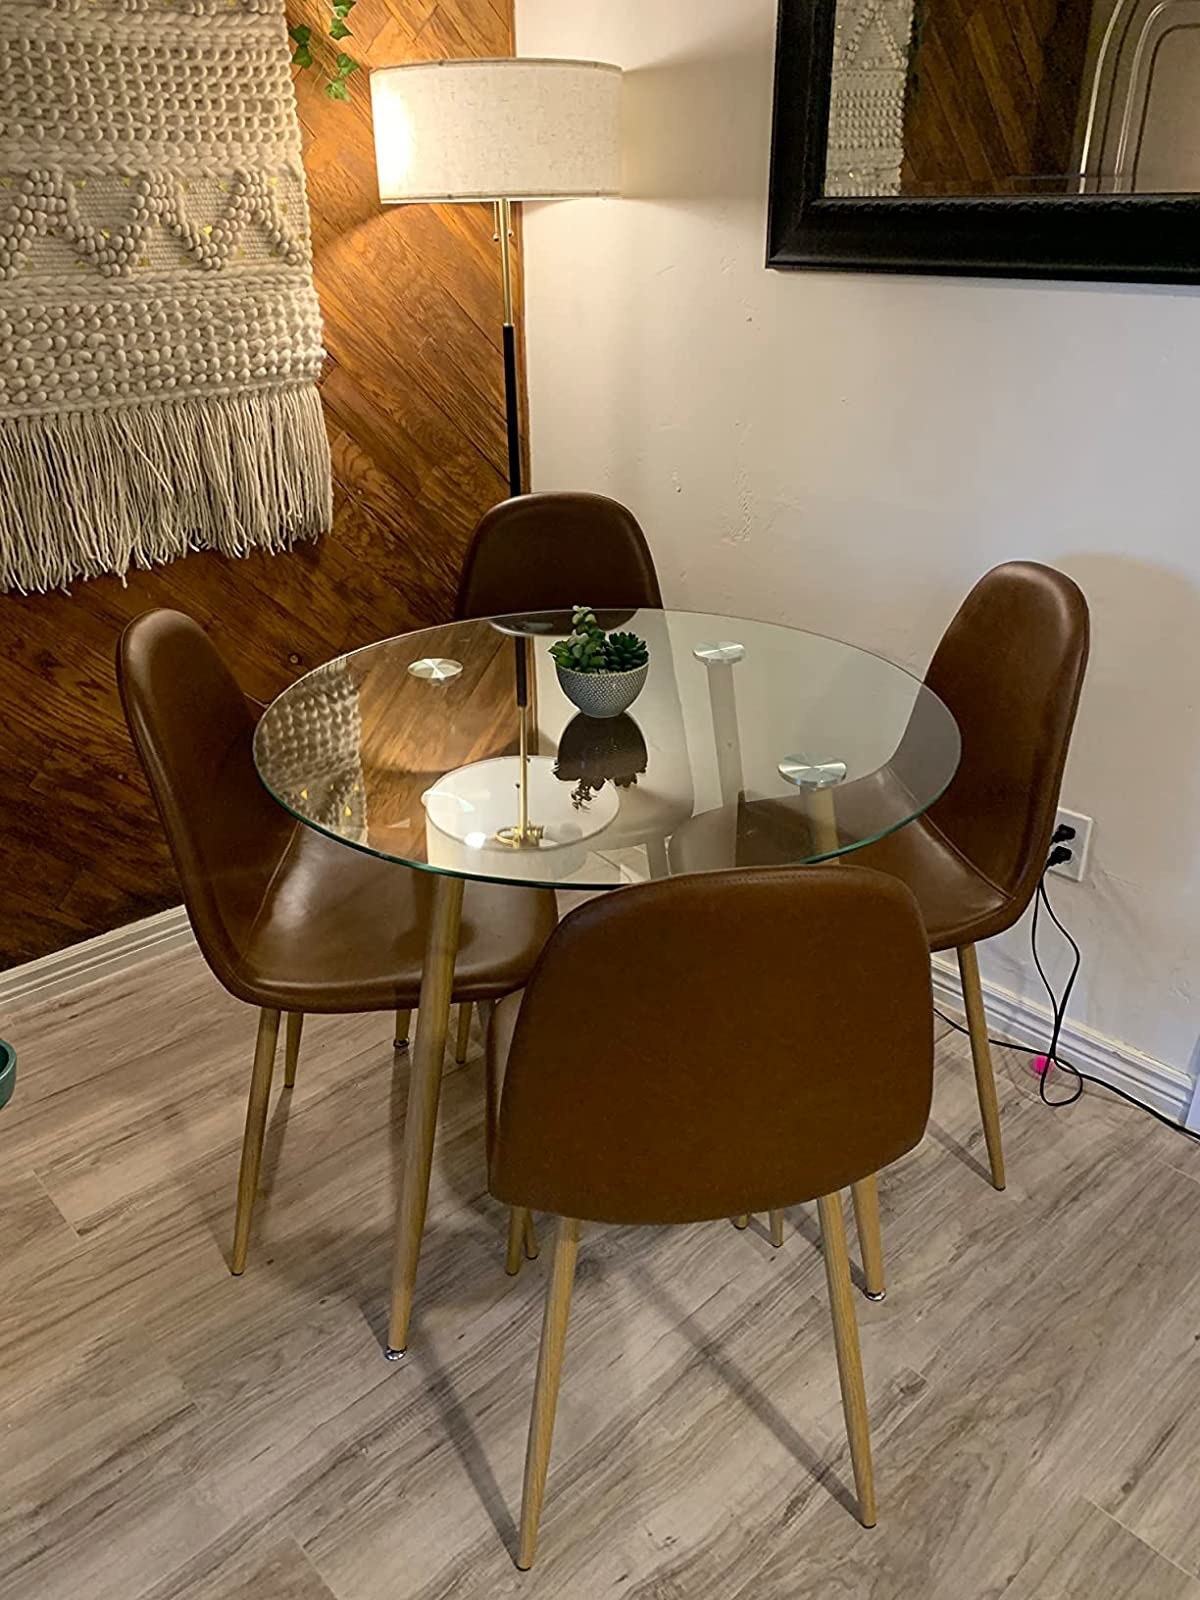 Reviewer image of brown leather chairs around a glass dining table